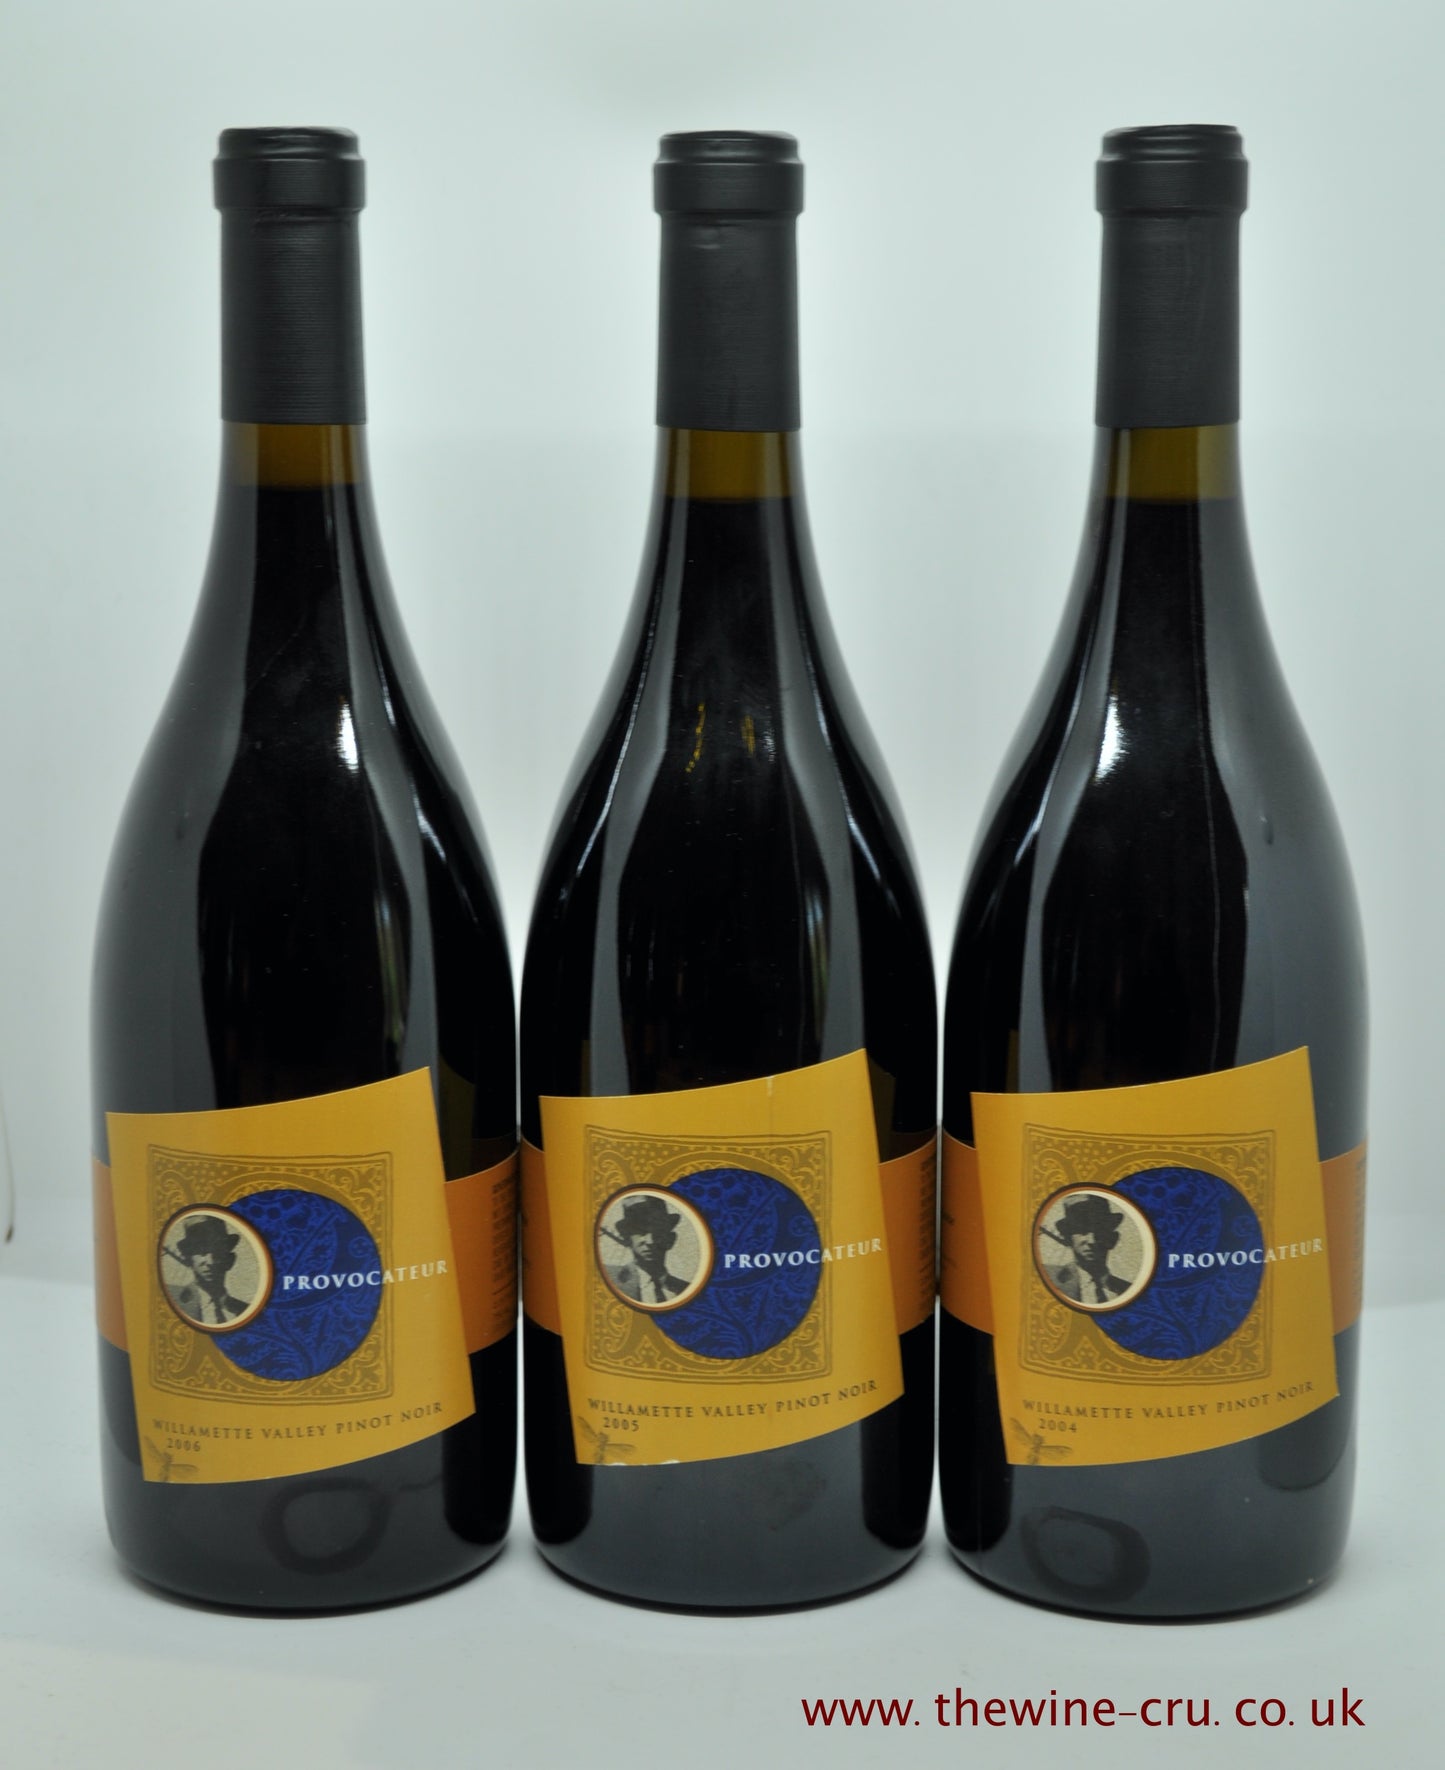 A three bottle vertical tasting package of 2004, 2005 and 2006 vintage red wines. Provocateur JK Carriere Pinot Noir. USA Oregon. Immediate delivery. Free local delivery.